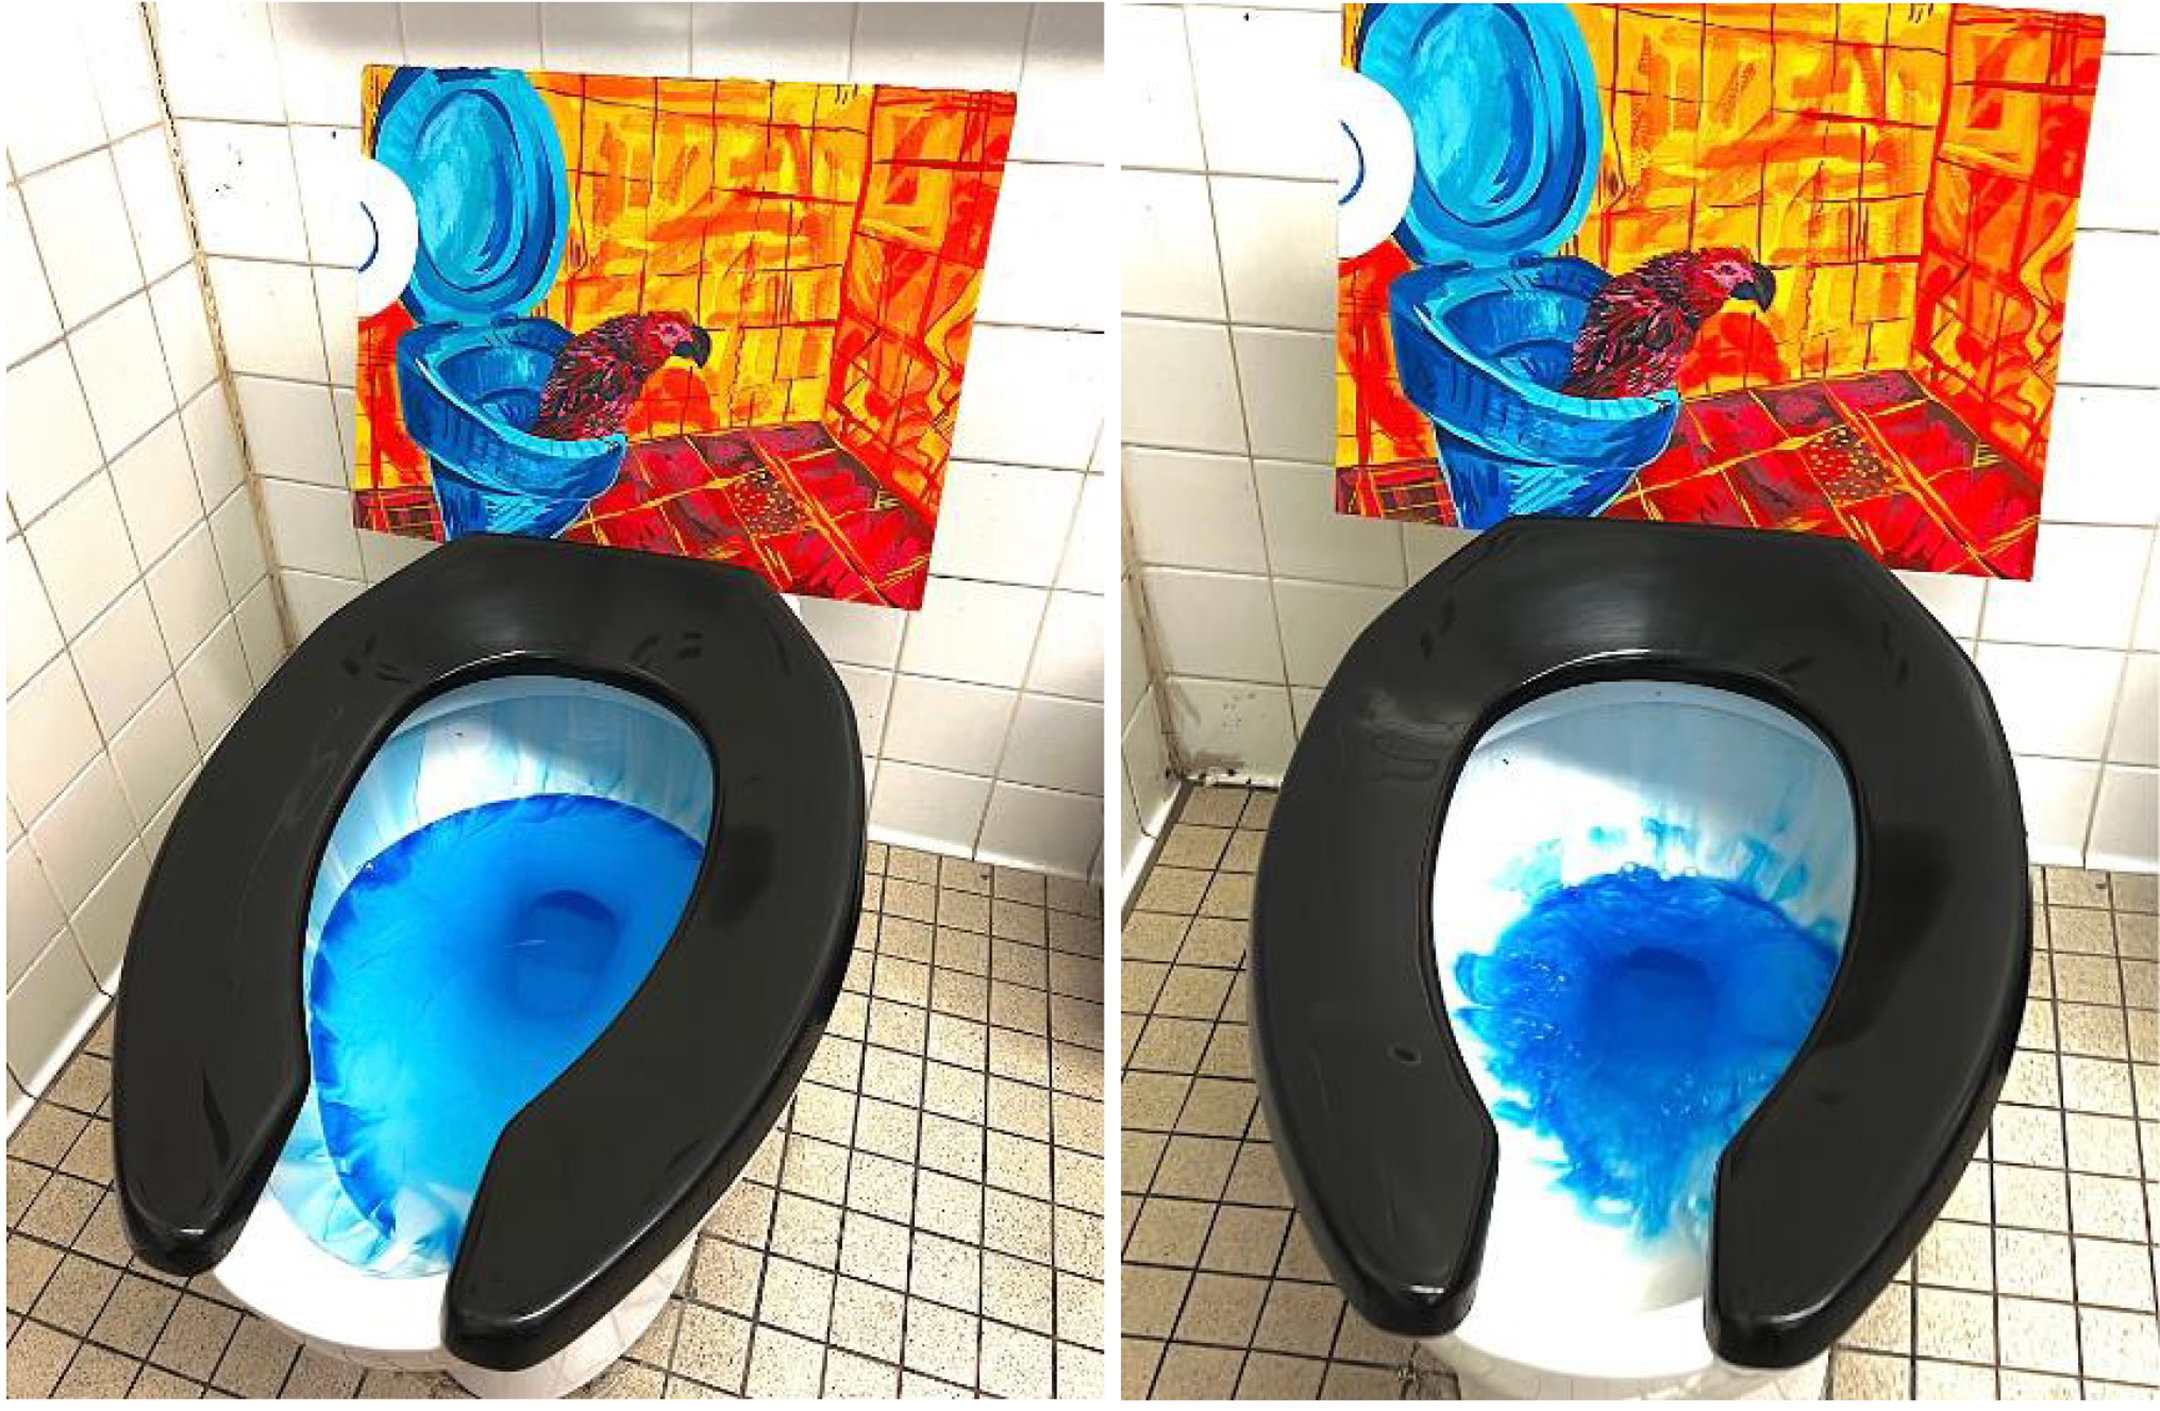 two photos, side by side, of a toilet with a painting of a bird coming out of a toilet propped on top of the seat